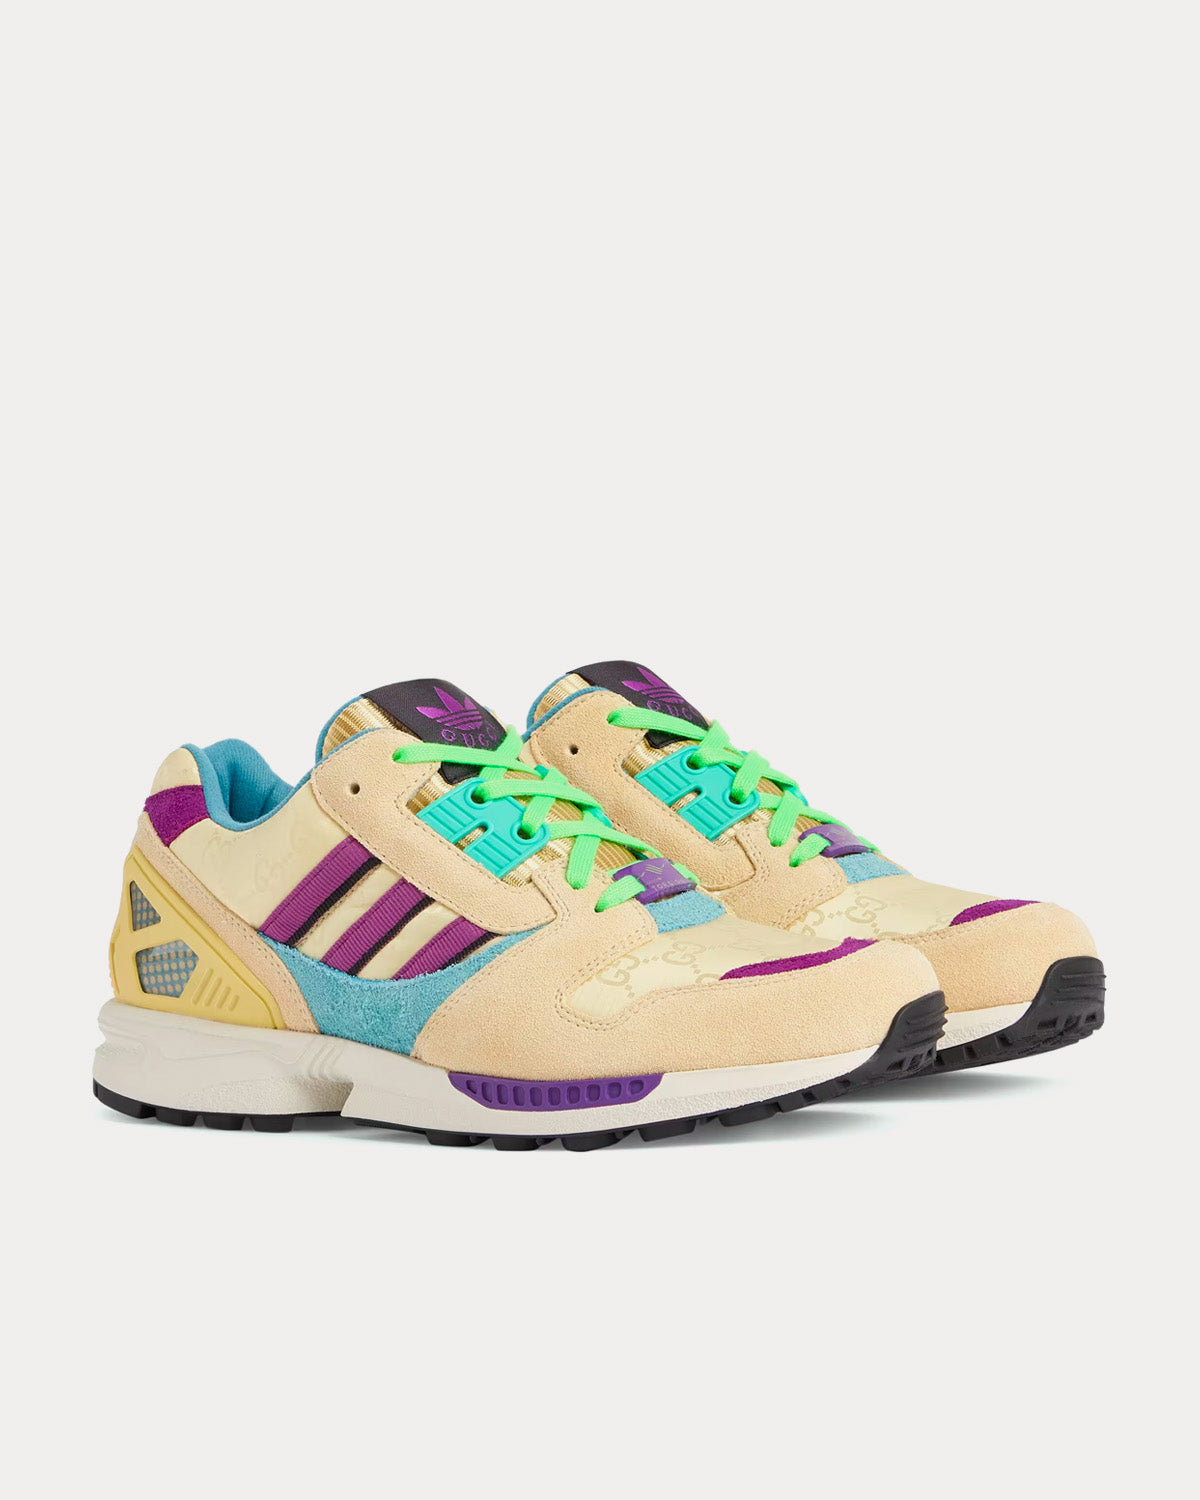 Adidas x Gucci ZX8000 GG Canvas Beige / Purple Low Top Sneakers 